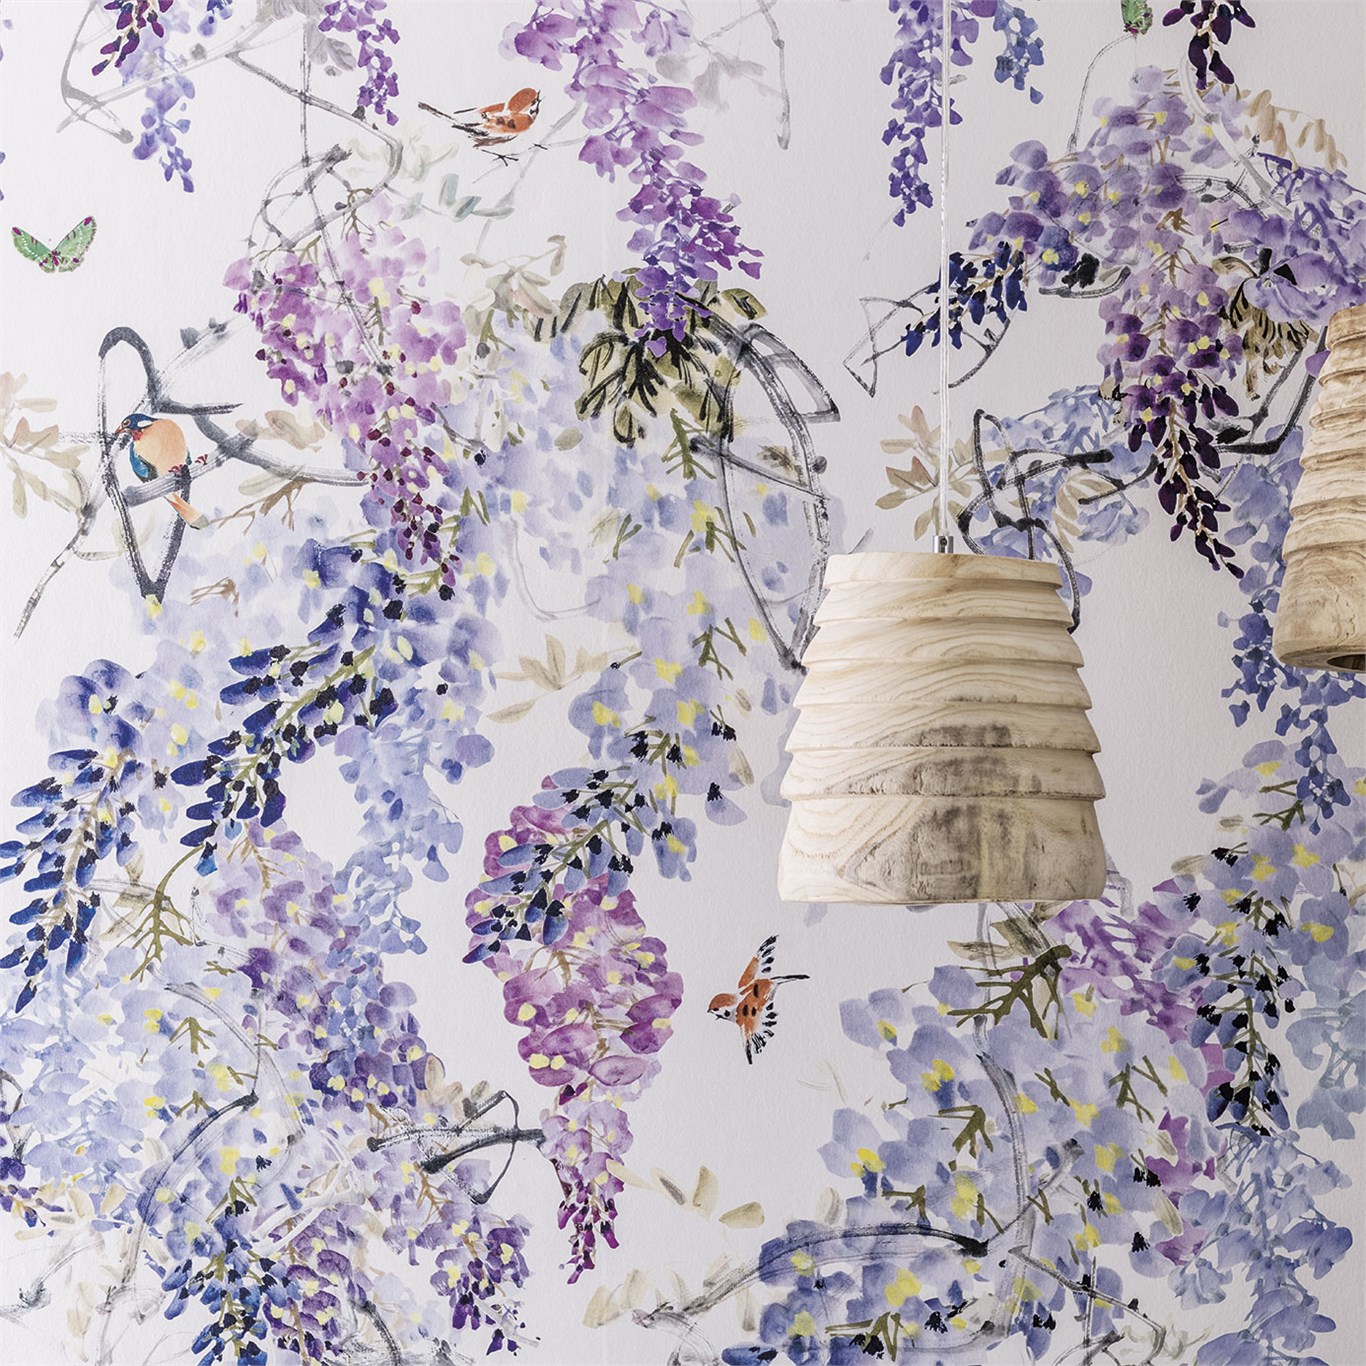 Wisteria Falls Panel A, A Wallpaper By Sanderson, Part - Sanderson Wisteria Falls - HD Wallpaper 